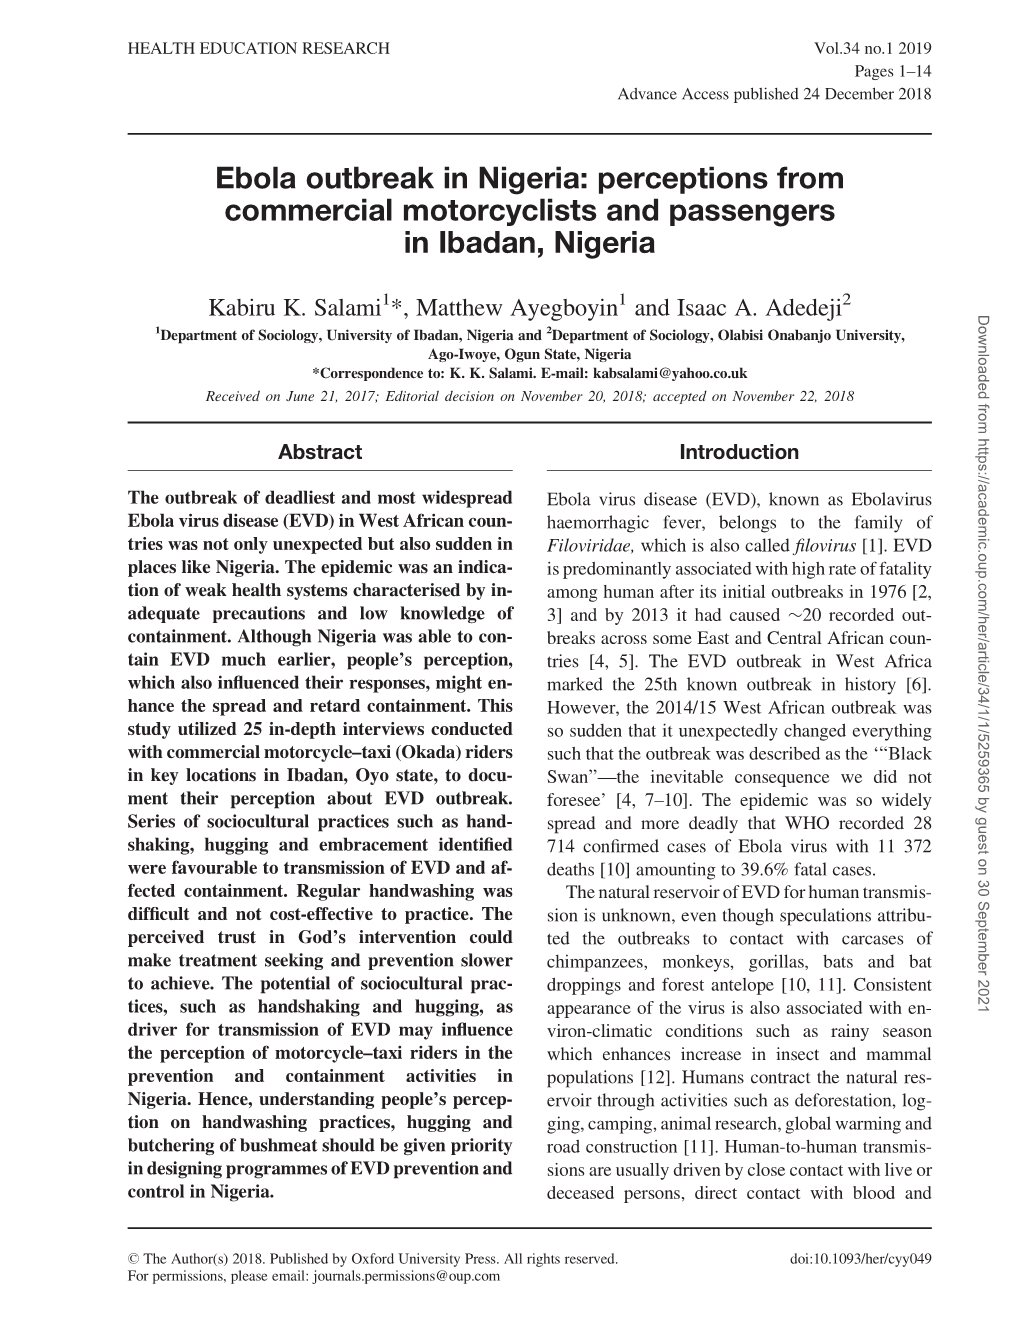 Ebola Outbreak in Nigeria: Perceptions from Commercial Motorcyclists and Passengers in Ibadan, Nigeria